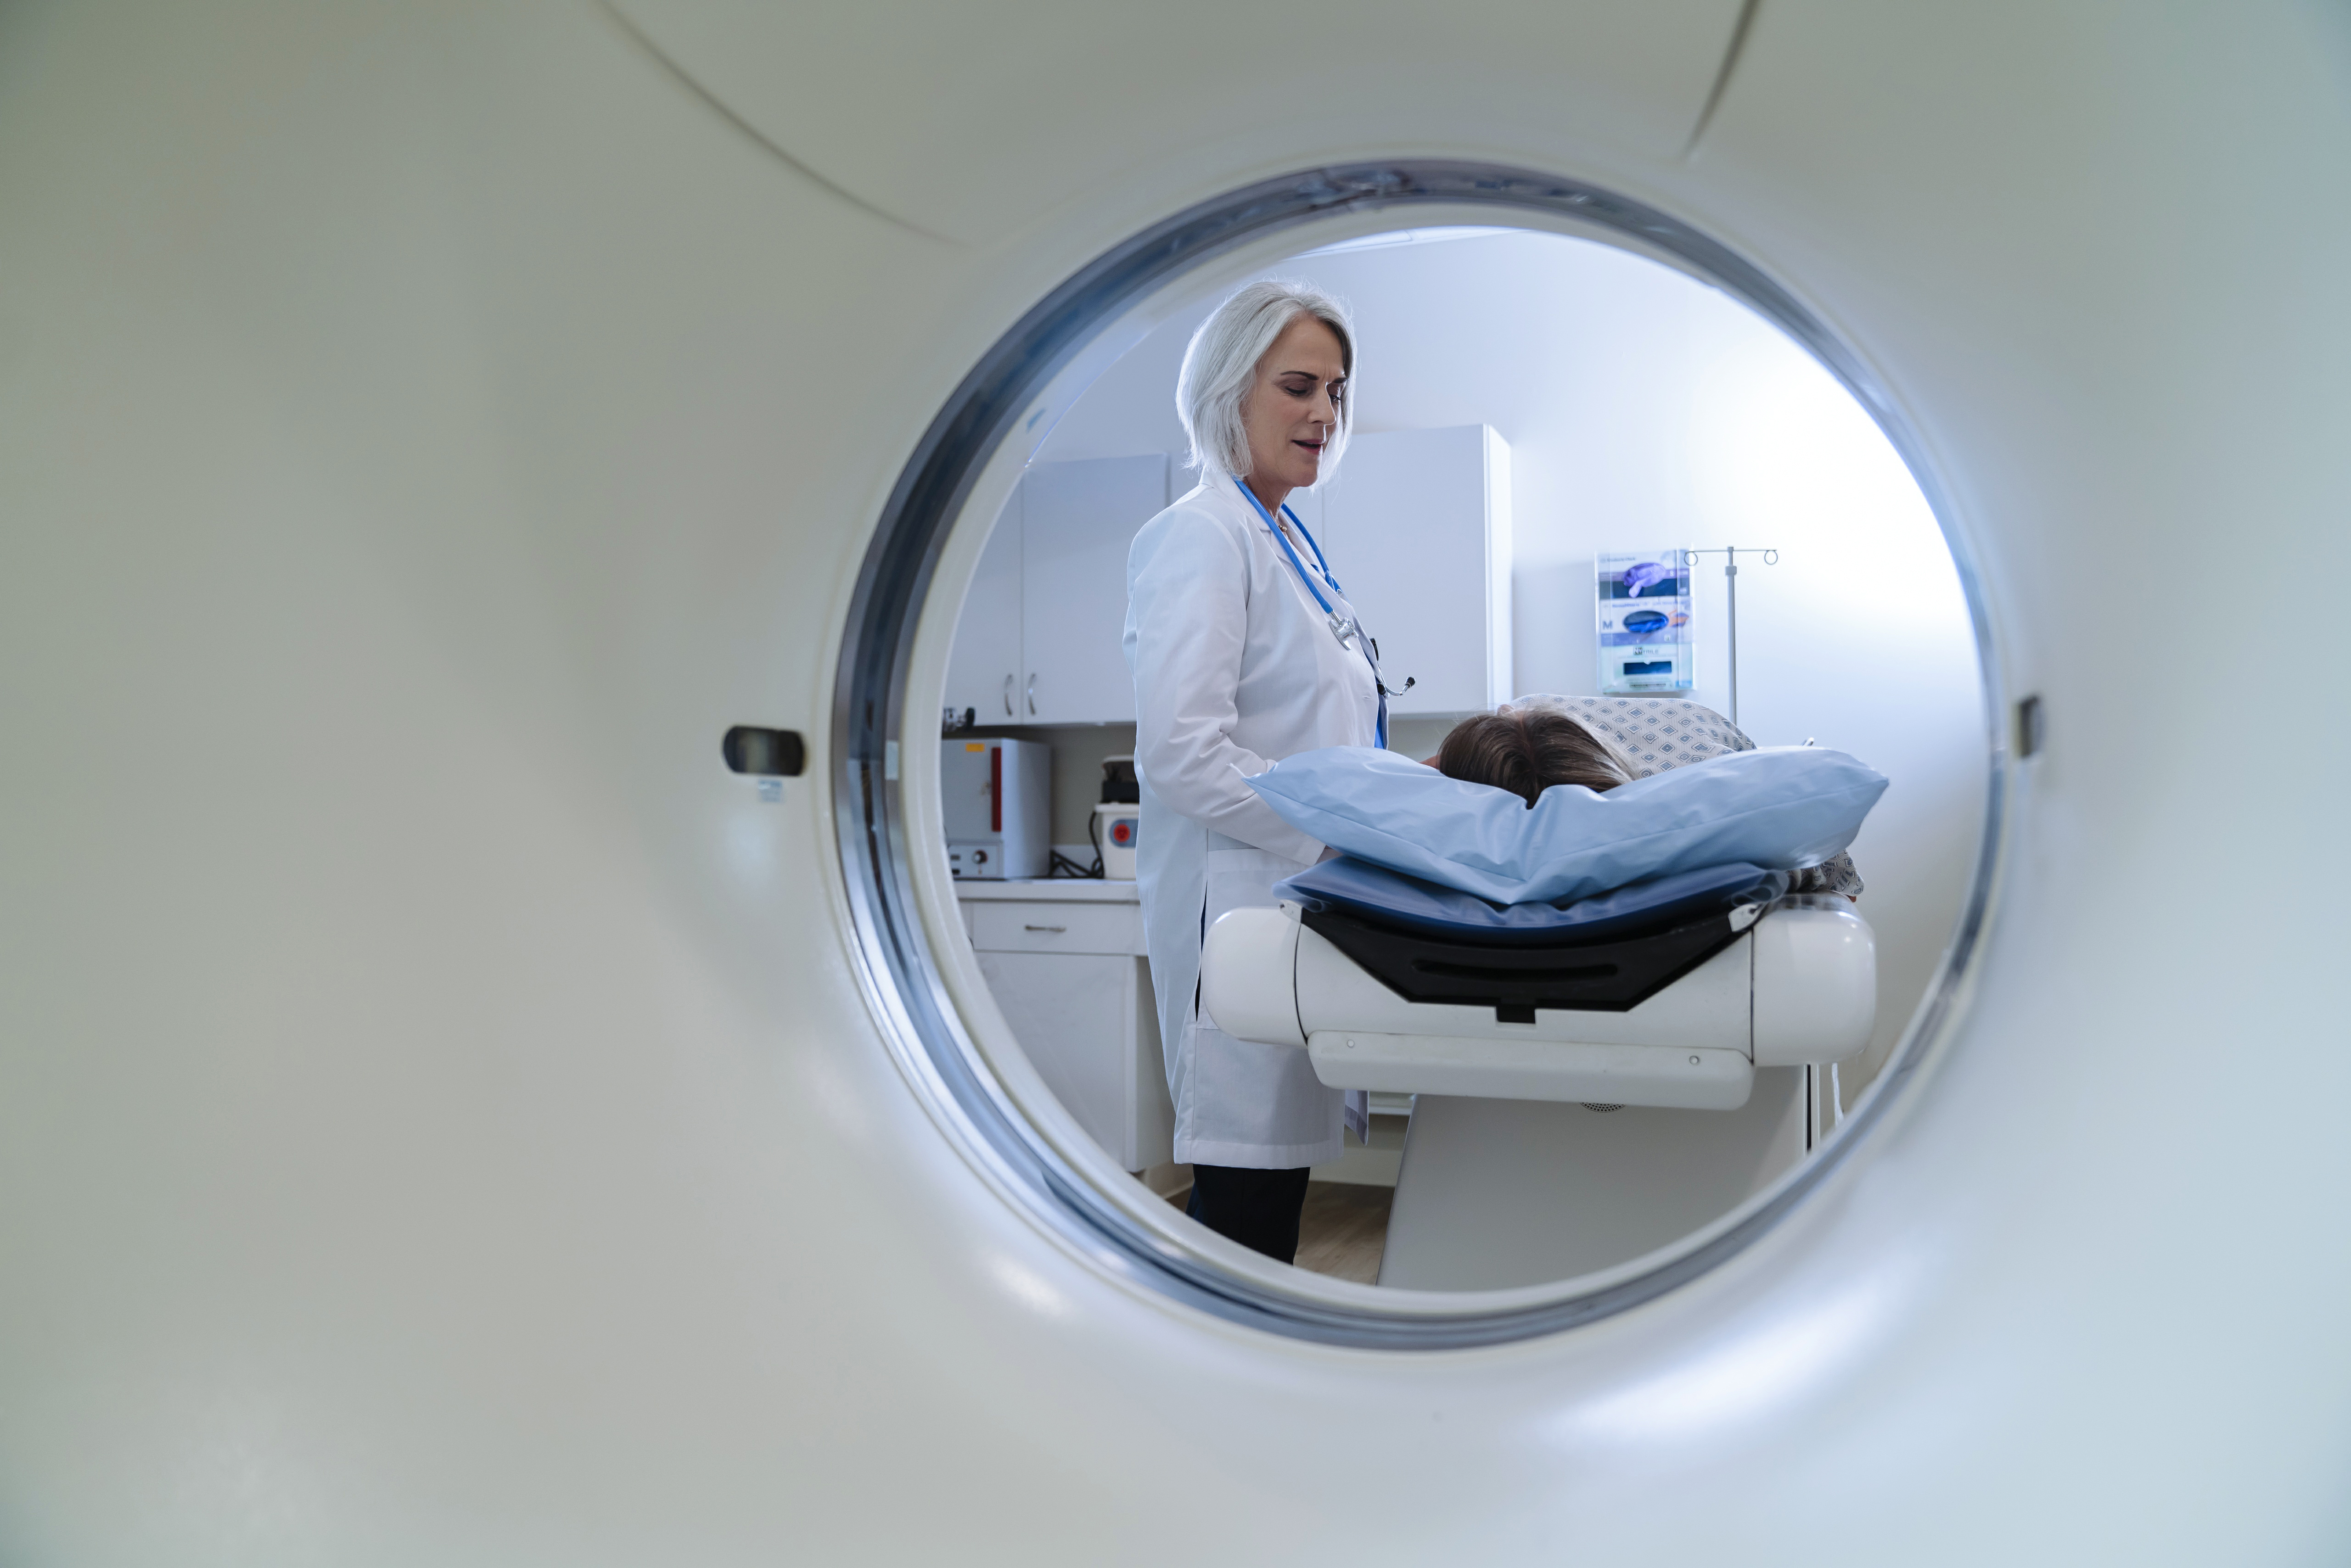 A discussion with ASTRO’s leader on improvements in diagnostic imaging, progress in personalized patient care, and advice for early career radiation oncologists